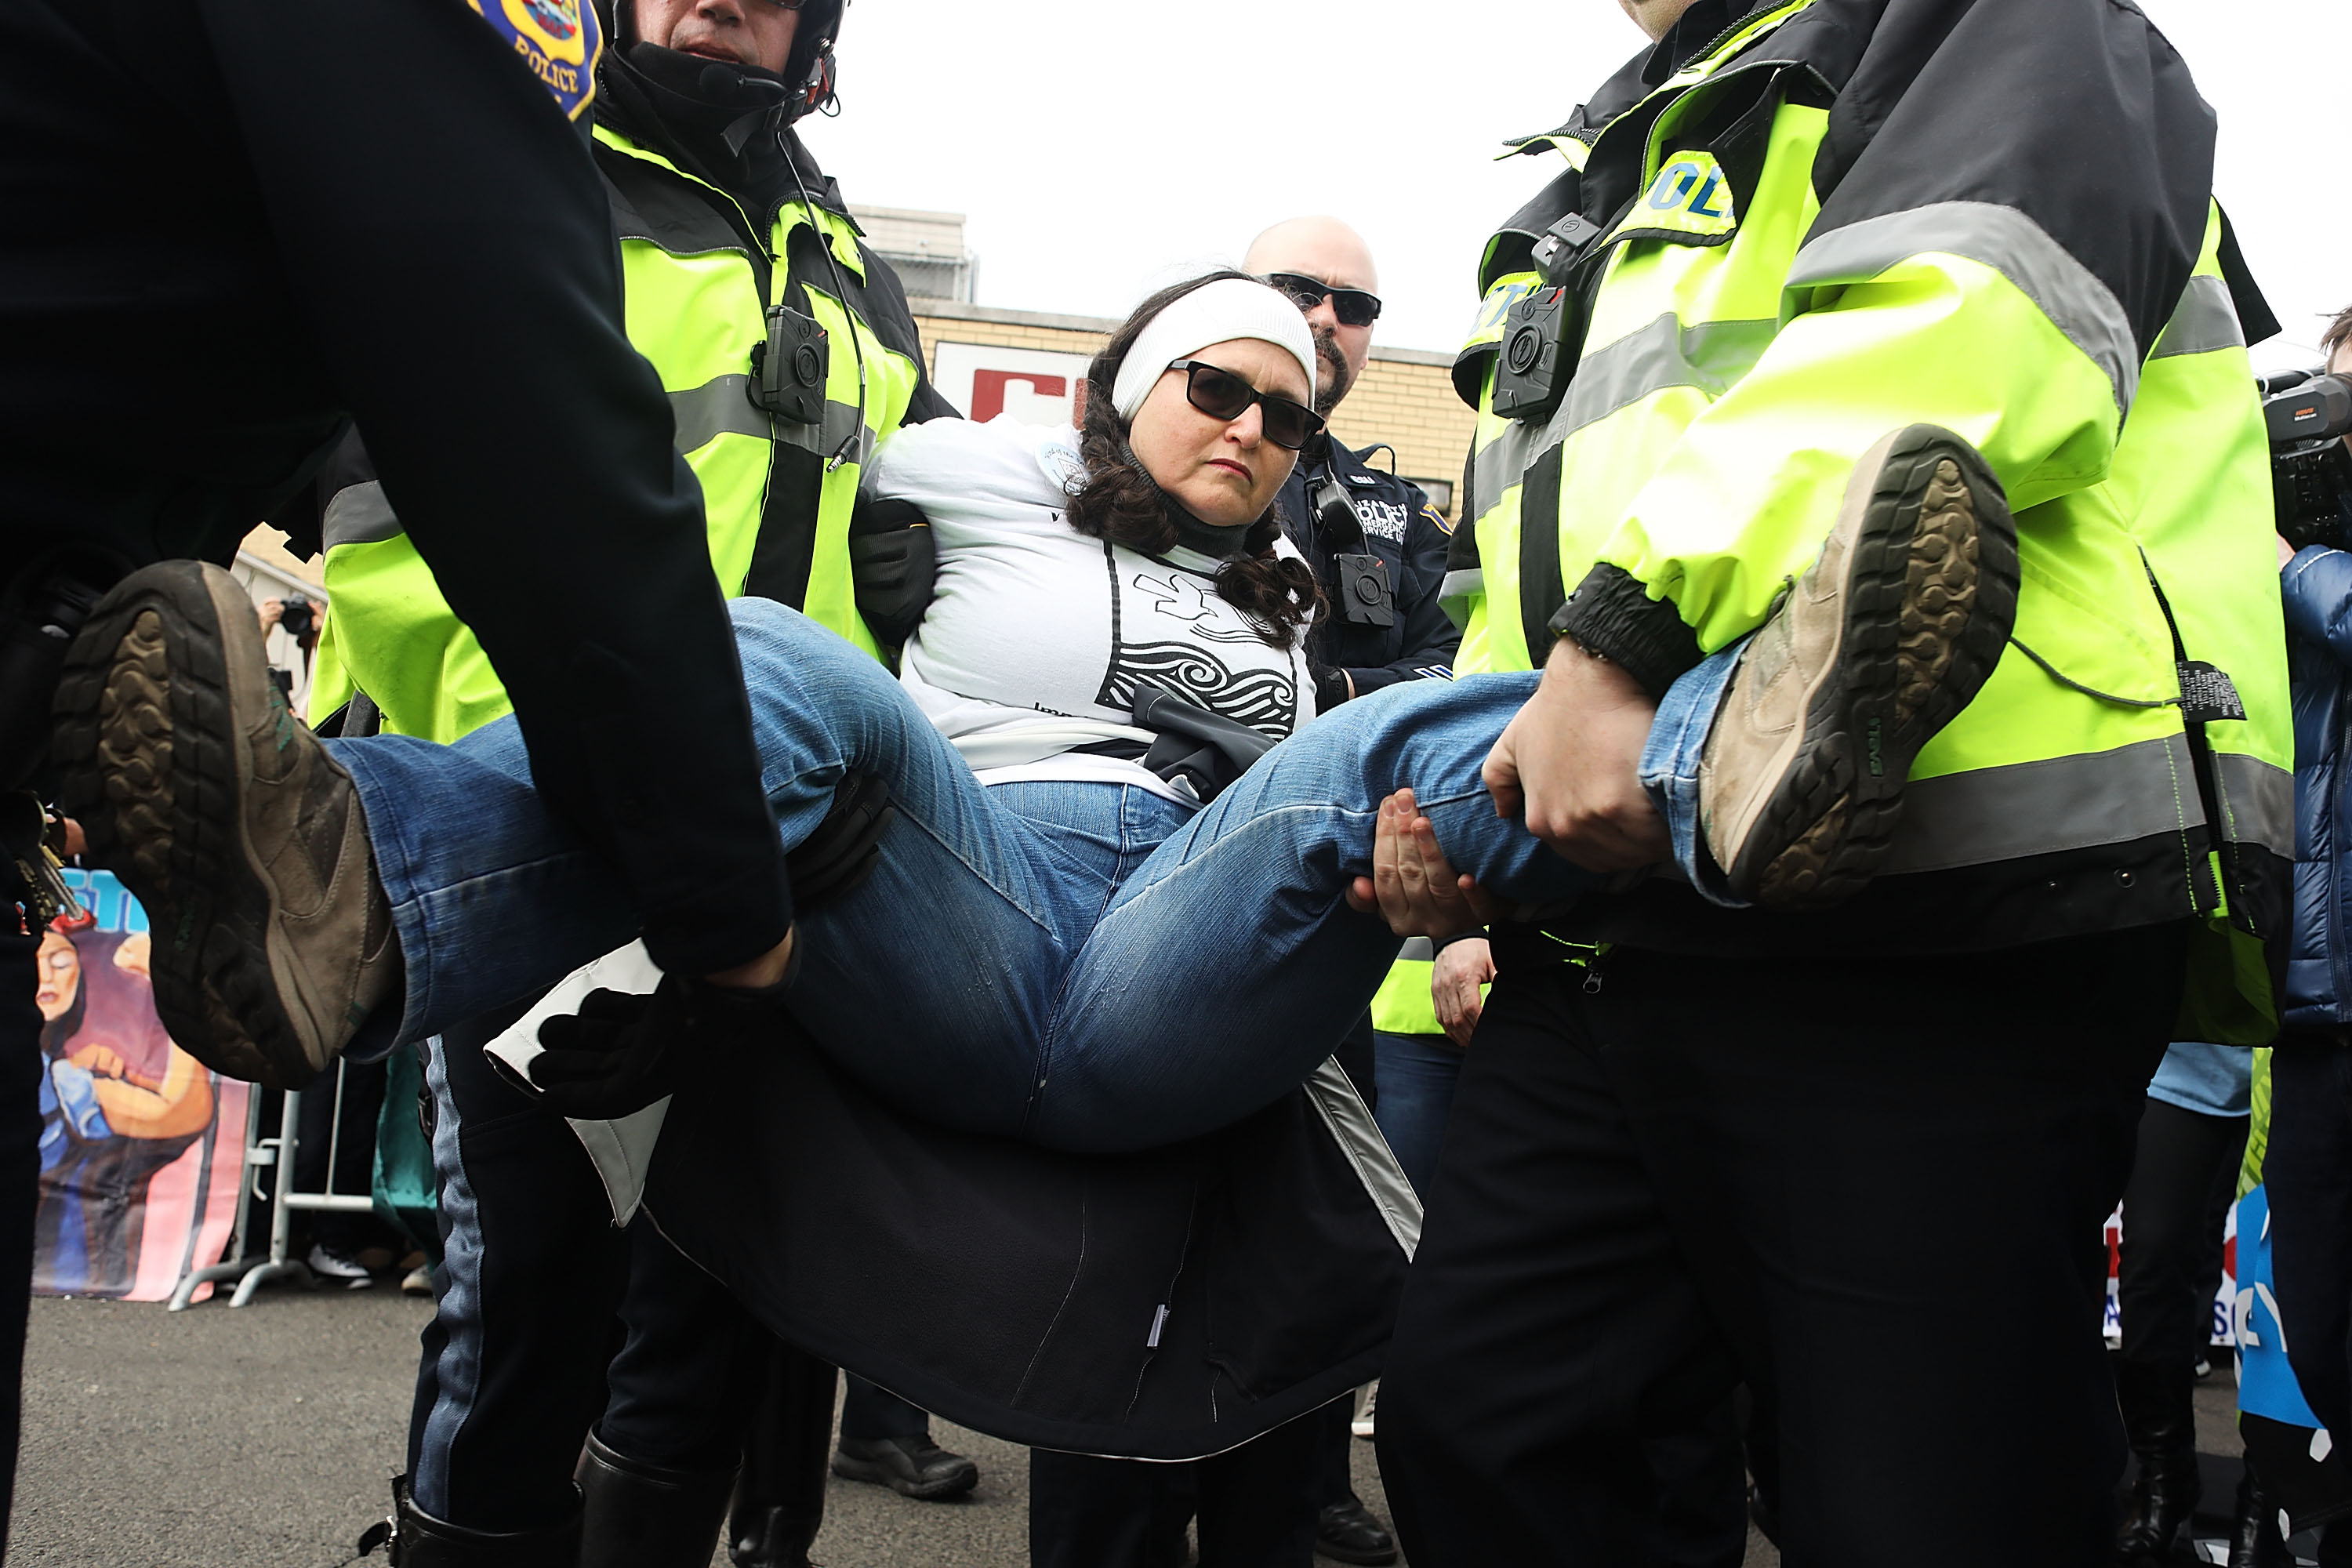 Police remove a protester from ICE detention center in NJ (Getty Images)